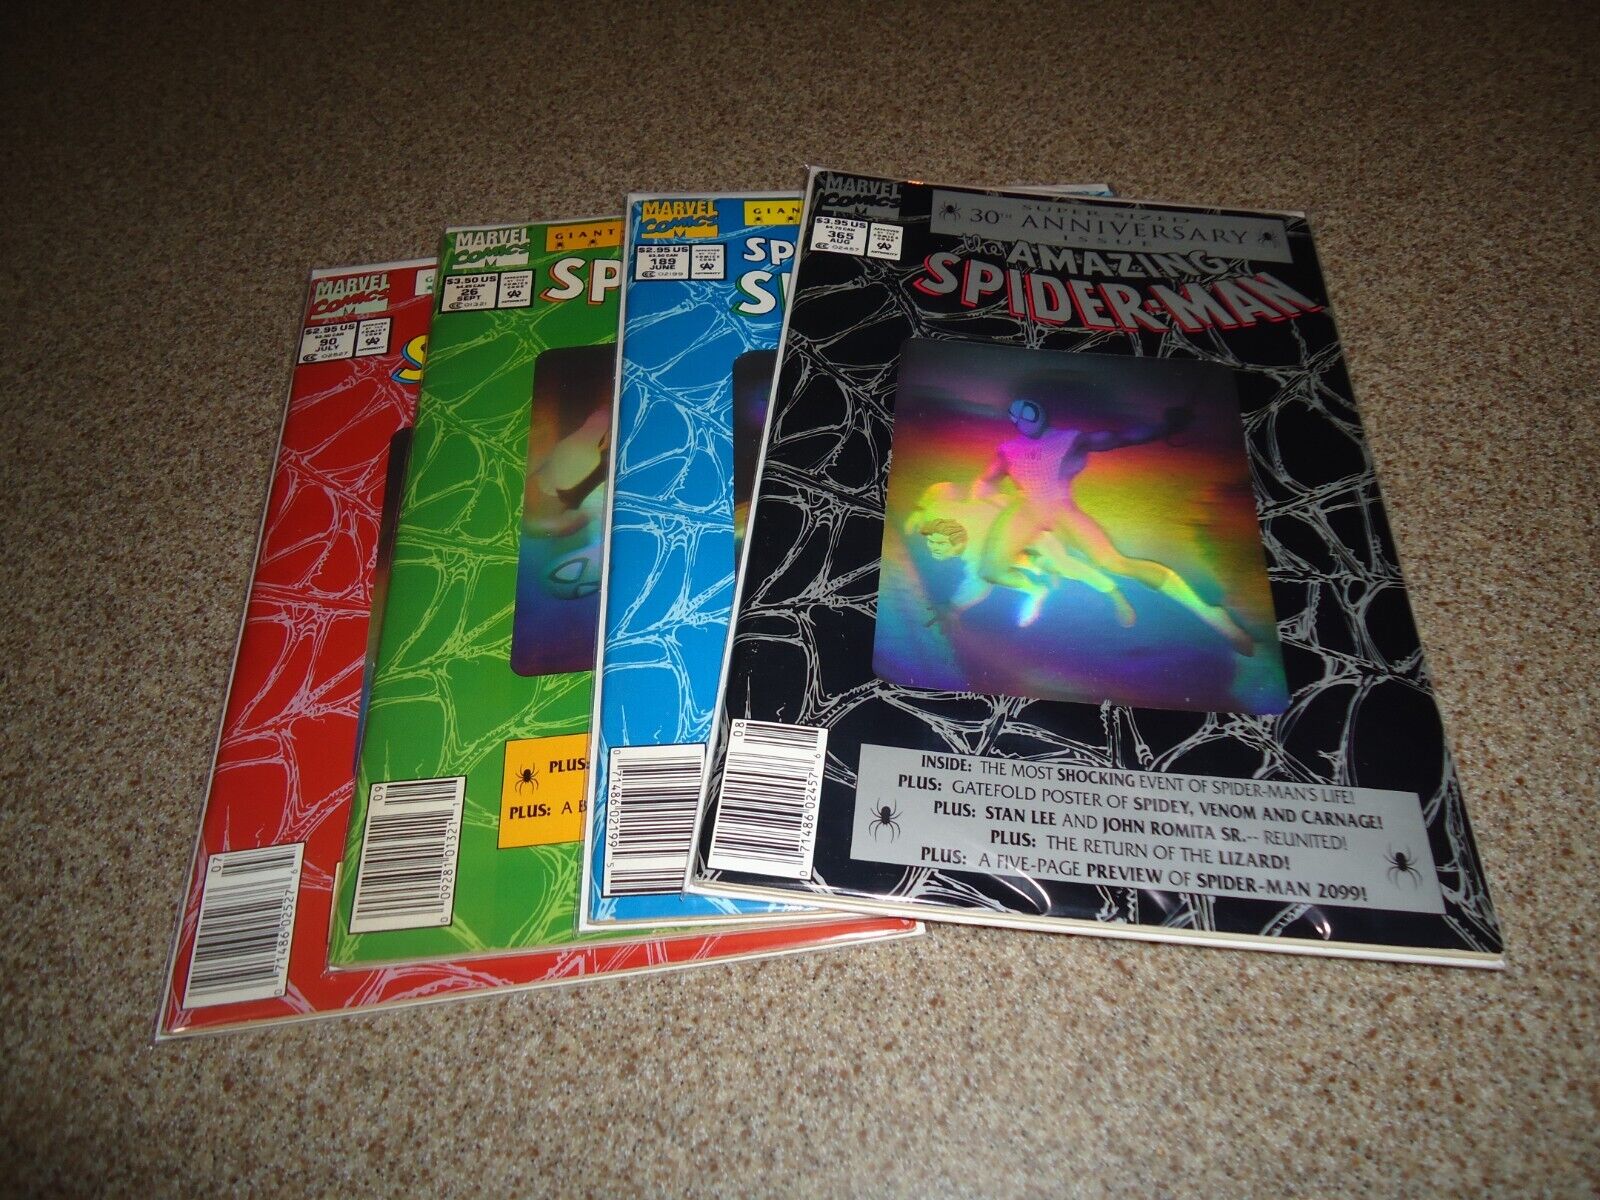 SPIDERMAN 30th ANNIVERSARY COMPLETE HALOGRAM 1-4 SET NEWS STAND ALL FIRST PRINT